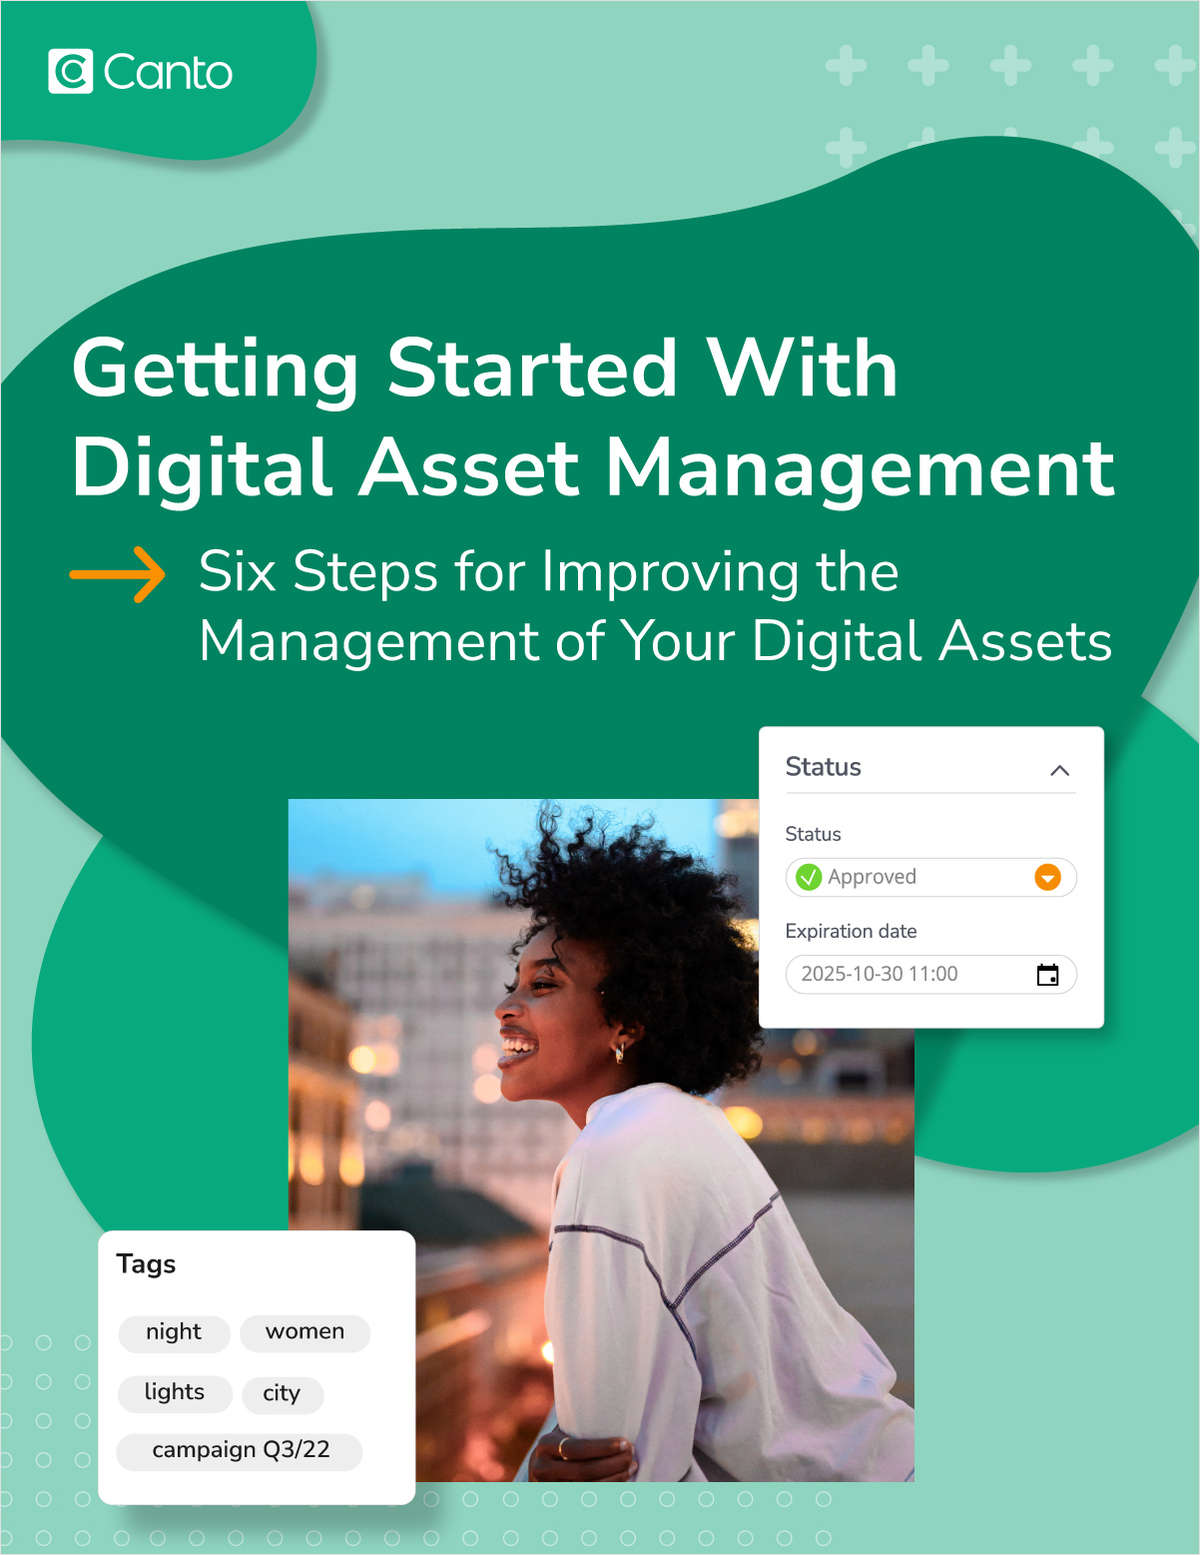 Getting Started With Digital Asset Management